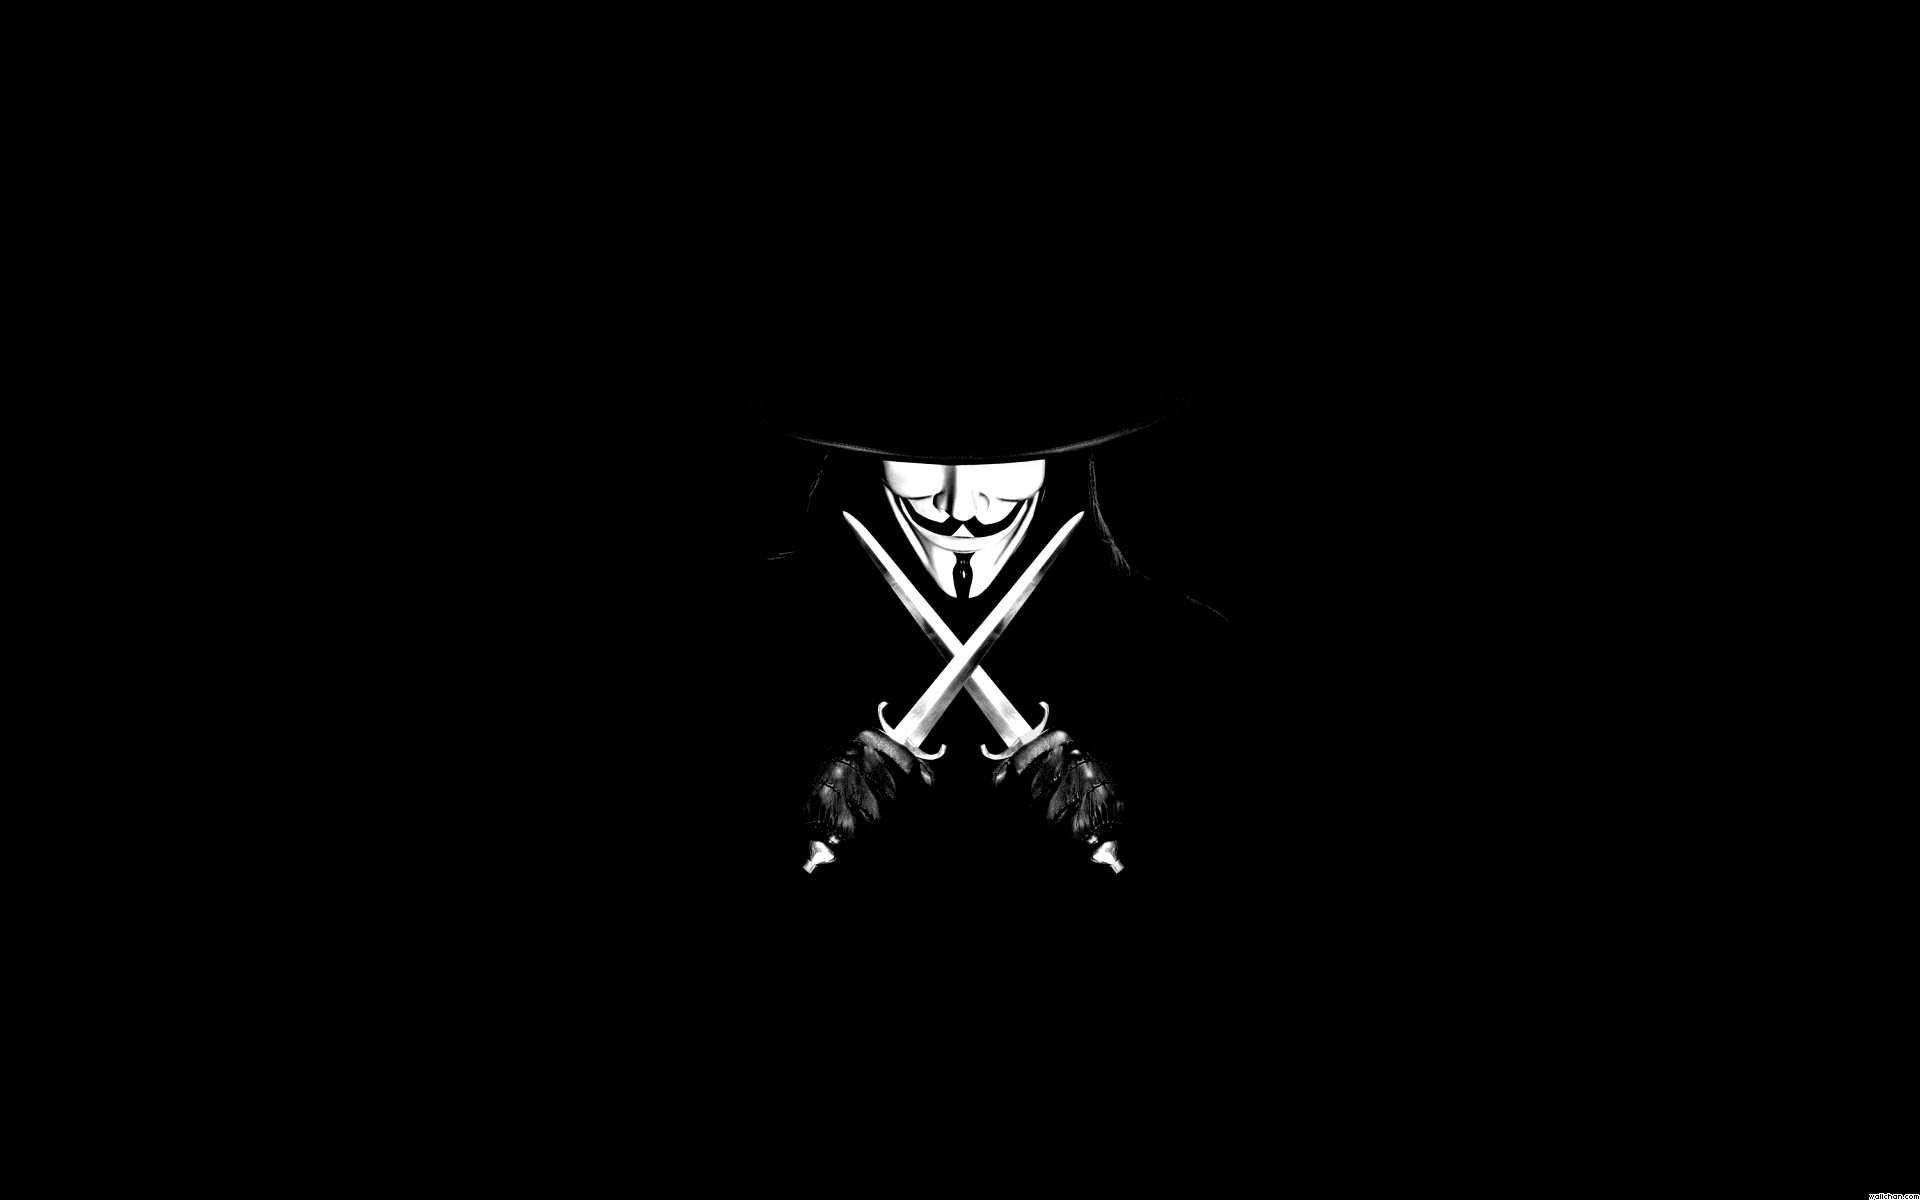 The Mask Of Anonymous - A Symbol Of Courage And Revolution Background